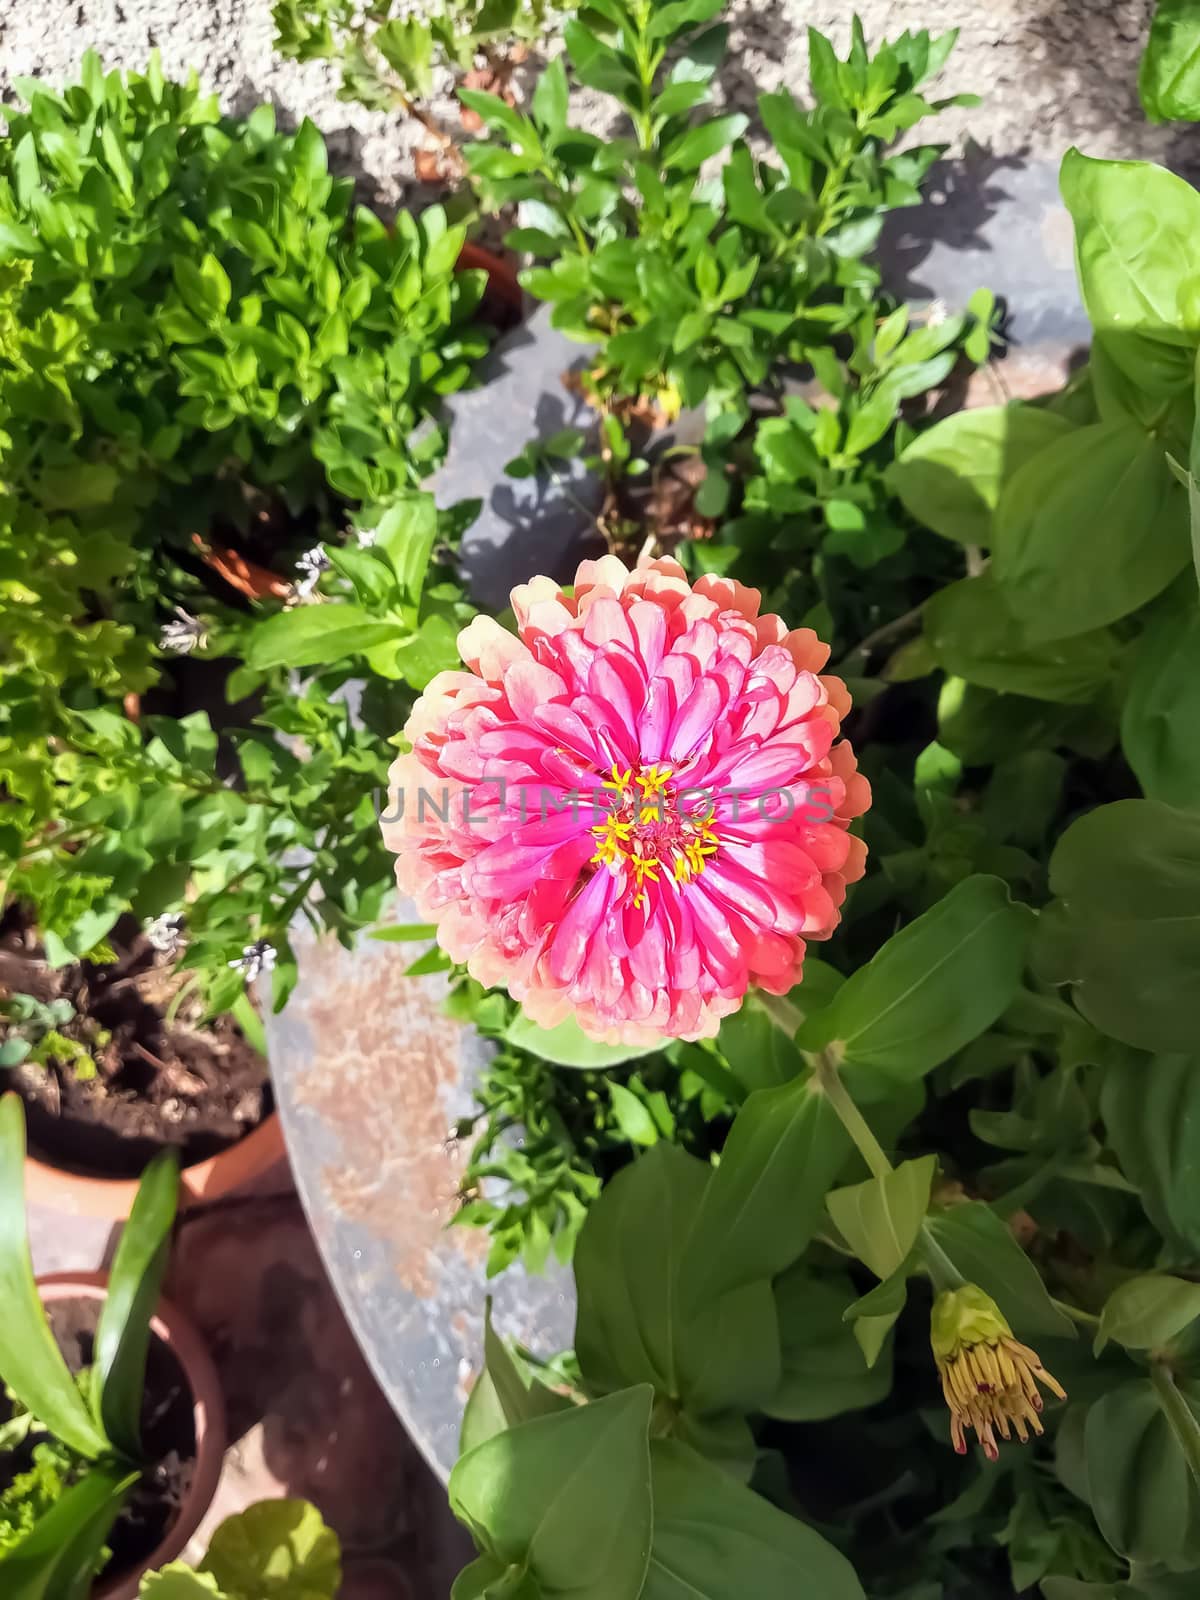 Pink zinnia flower with yellow center with green leaves